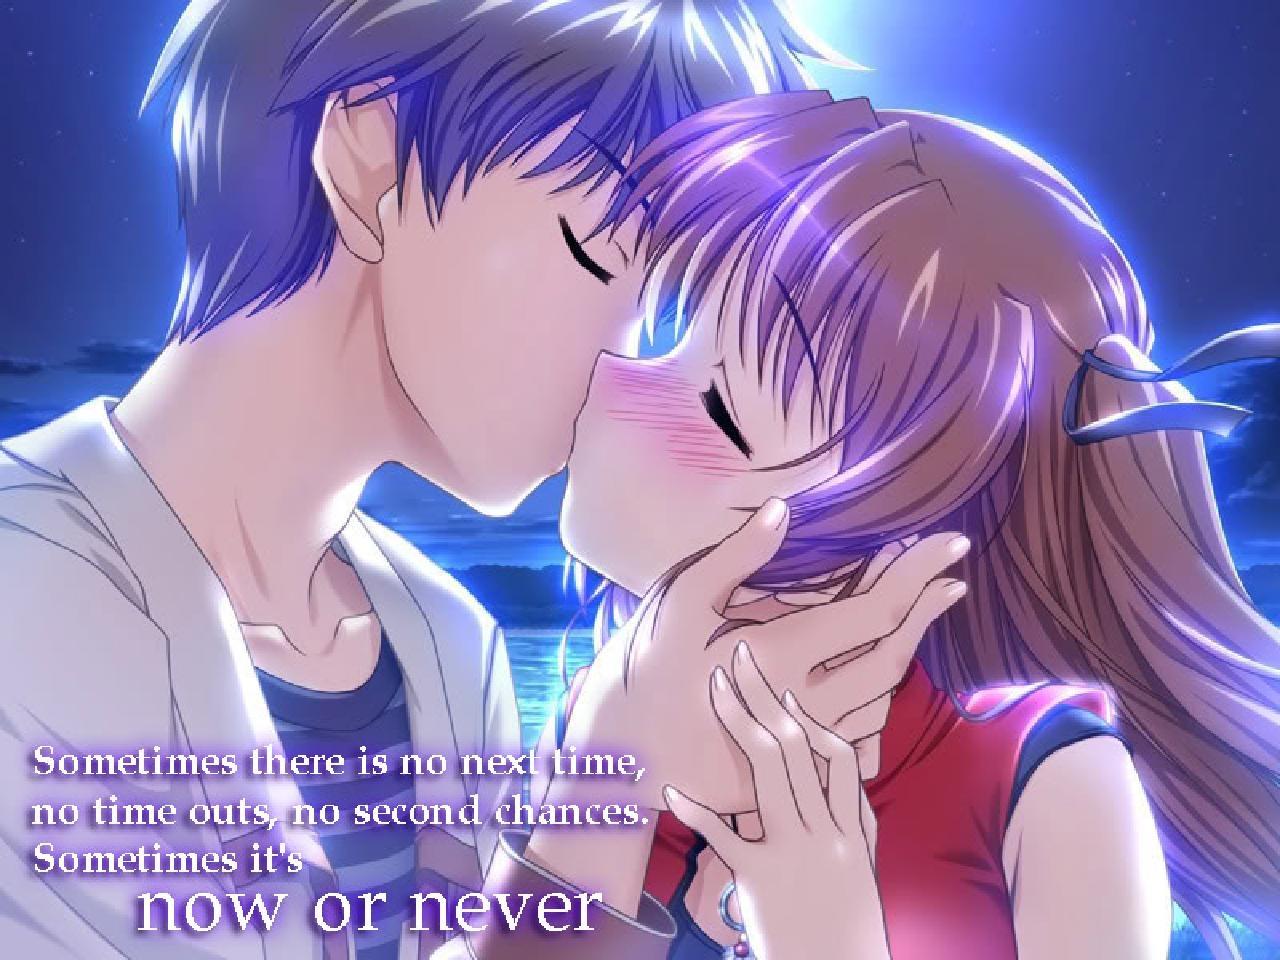 Cute Anime Girl And Boy Kiss Wallpapers - Wallpaper Cave